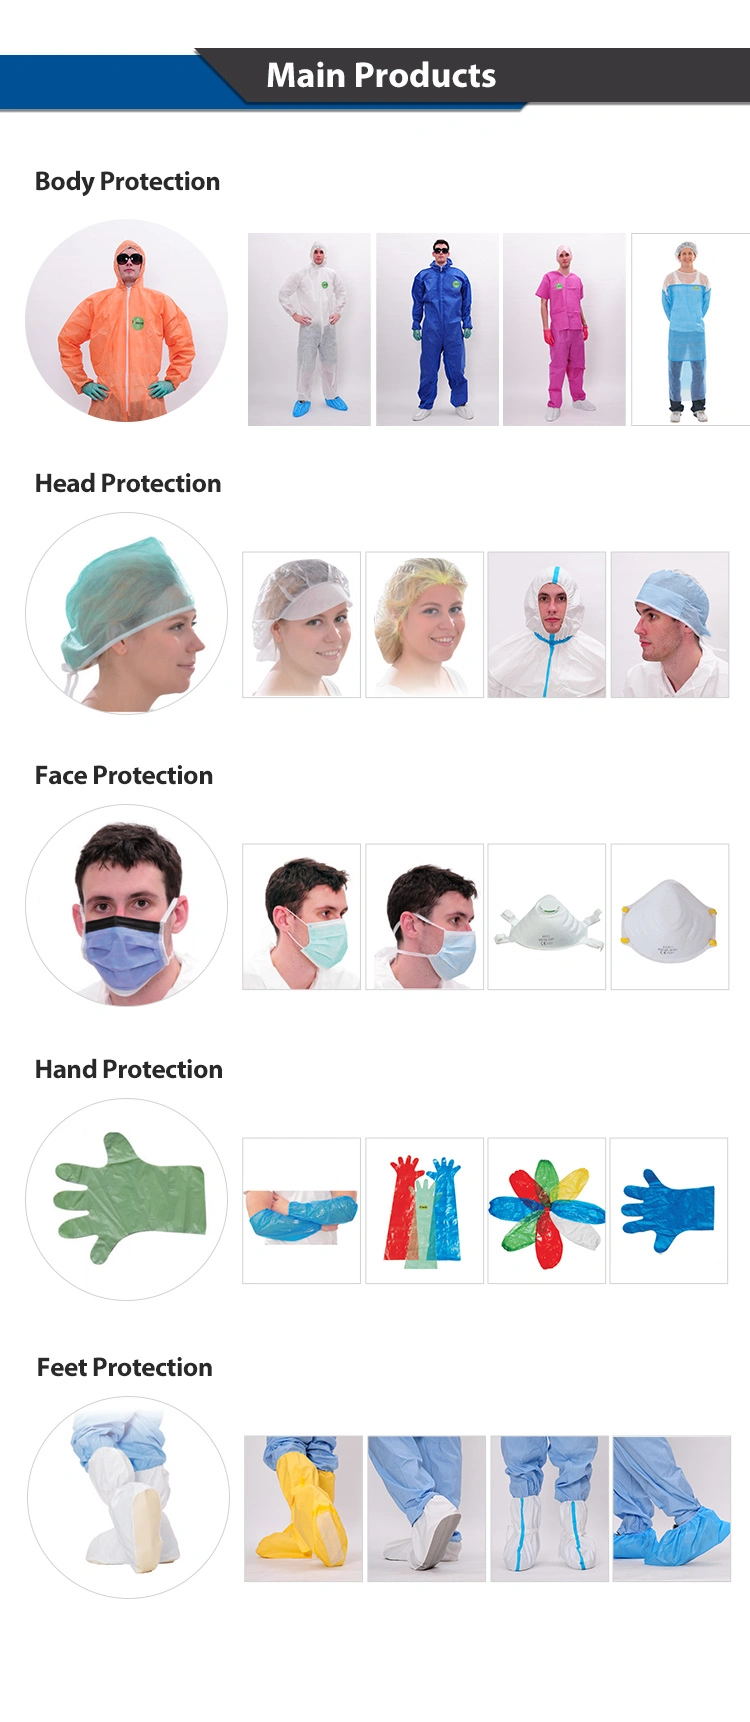 3 Ply Disposable Face Mask Nonwoven Polypropylene PP From Raytex